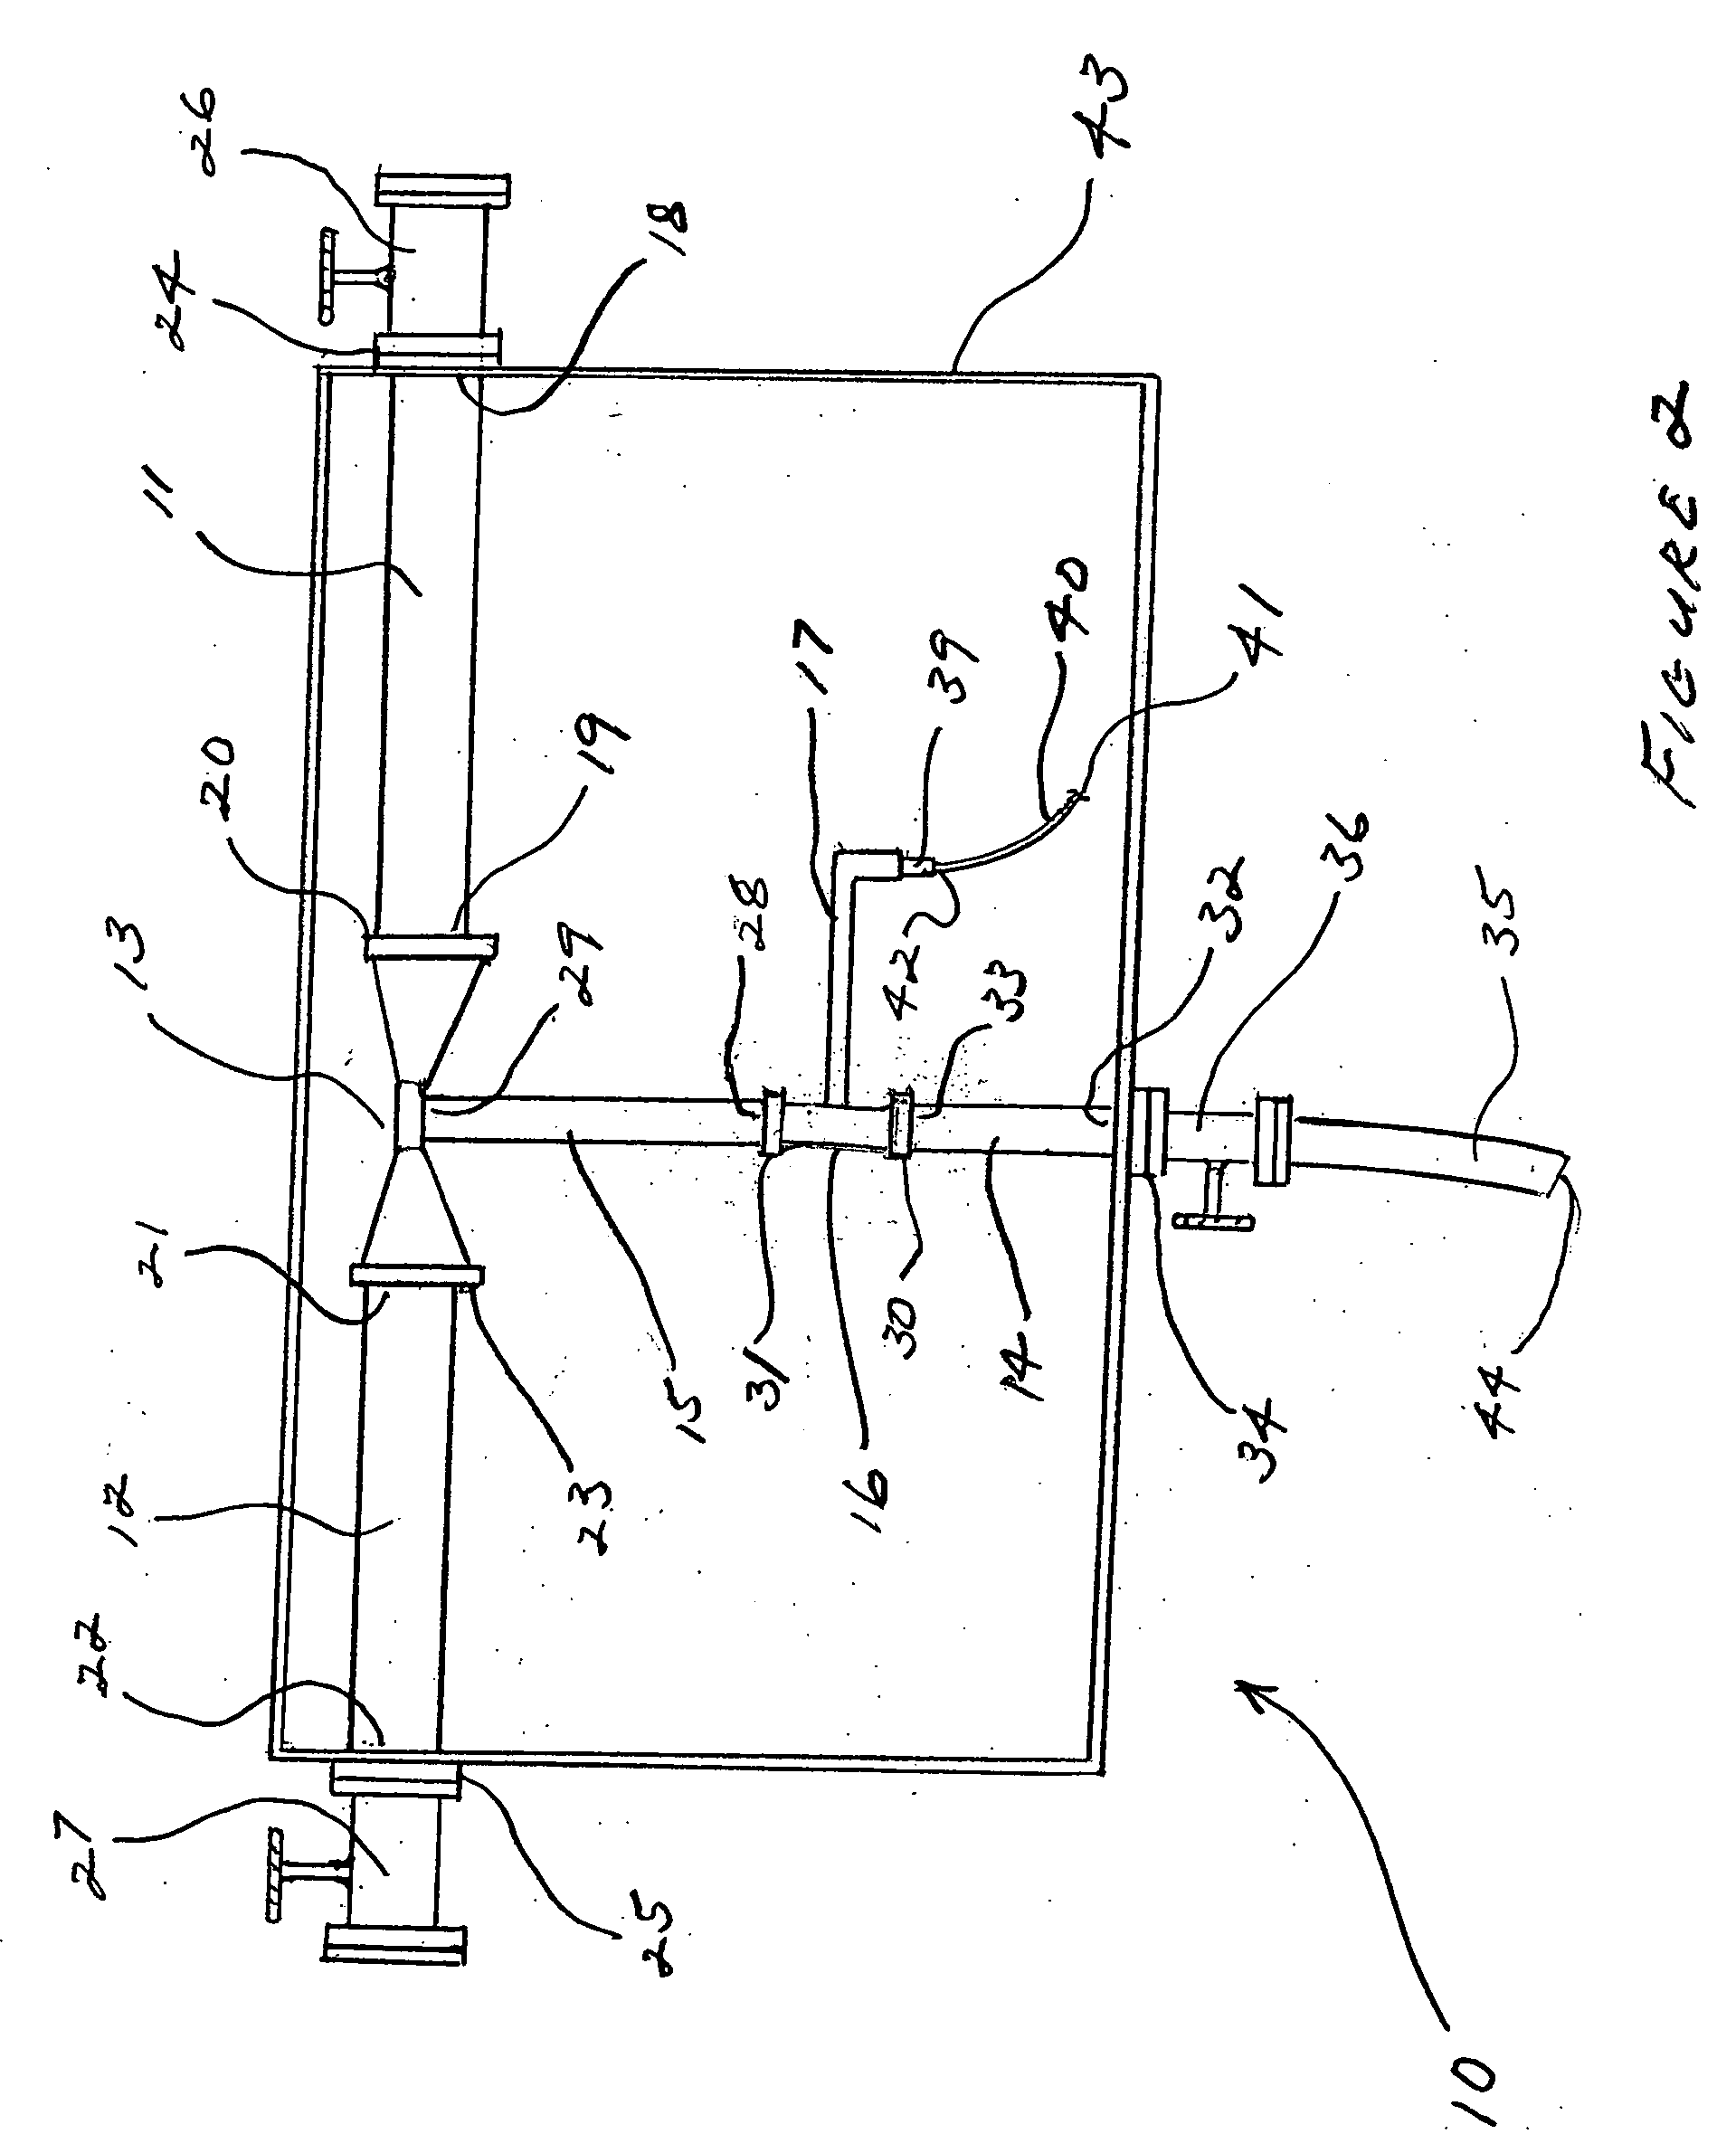 Biological fluid treatment and disposal apparatus and method